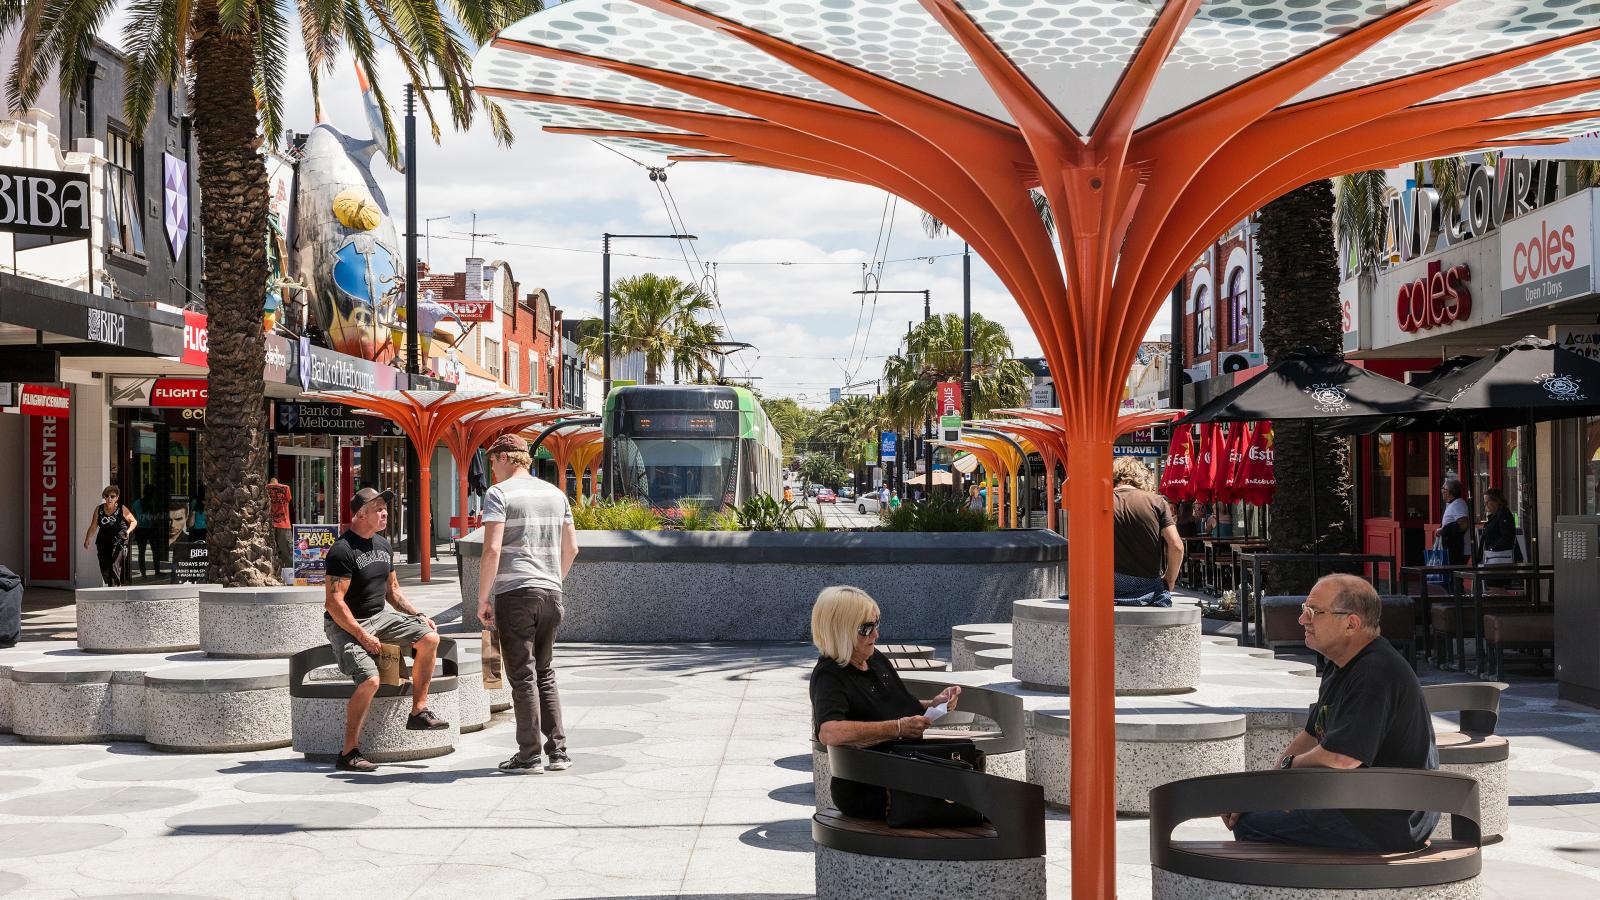 A bustling urban street scene on Acland Street features people sitting under modern, orange tree-shaped structures. Shops and palm trees line both sides of the street, with a green tram in the distance. The sky is partly cloudy, capturing the lively essence of St Kilda.